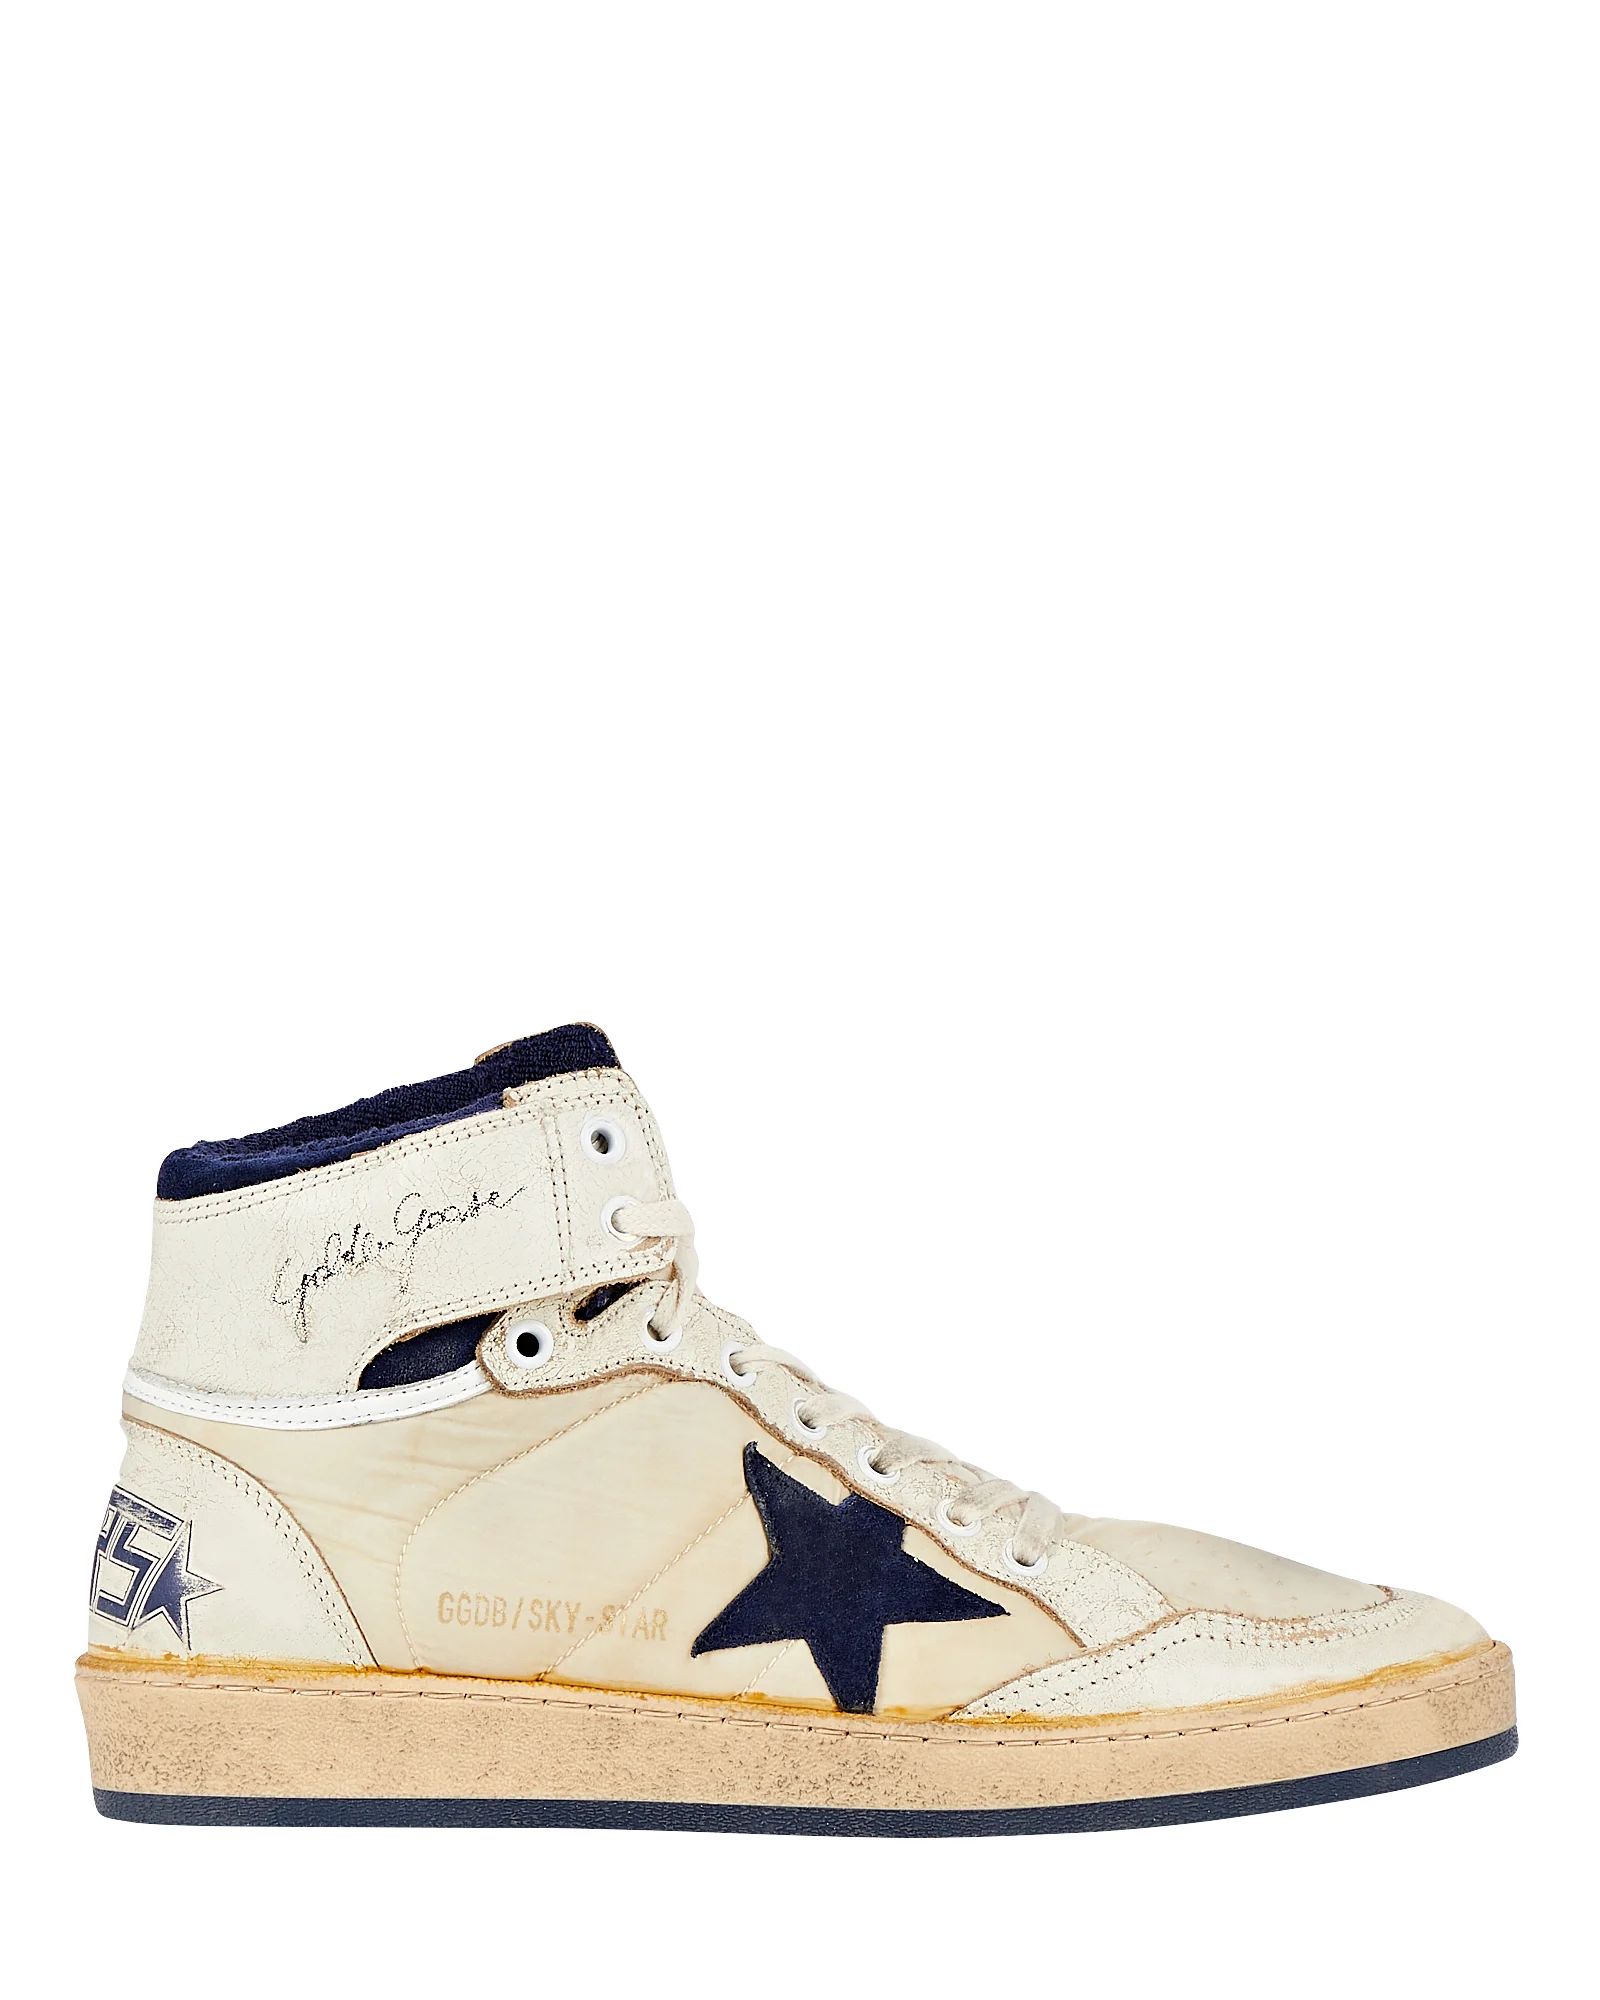 Sky Star Leather High-Top Sneakers | INTERMIX